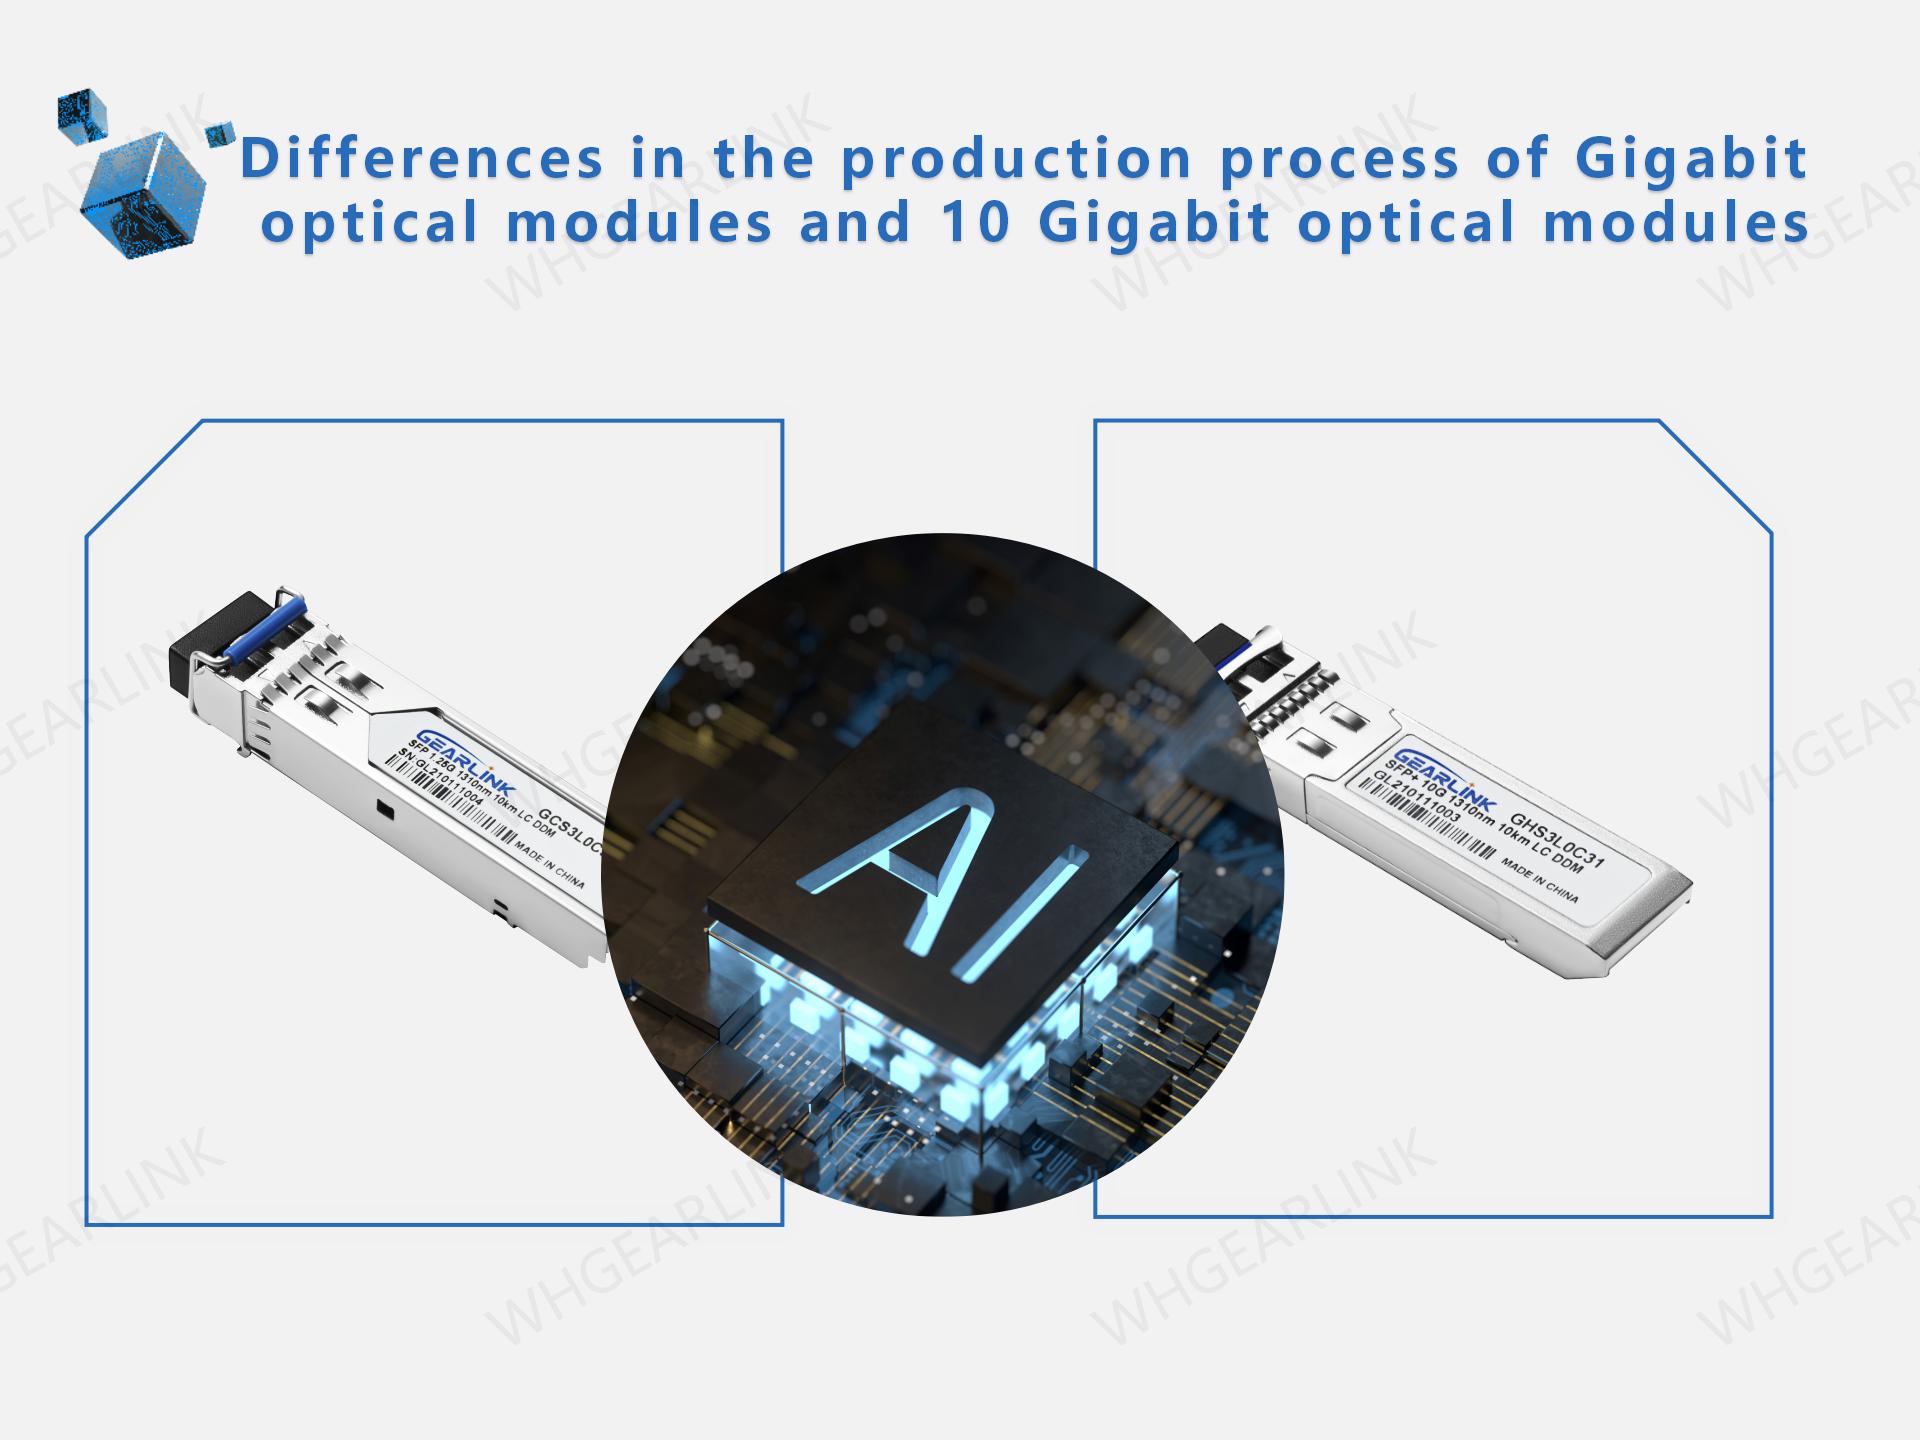 Differences in the production process of Gigabit optical modules and 10 Gigabit optical modules